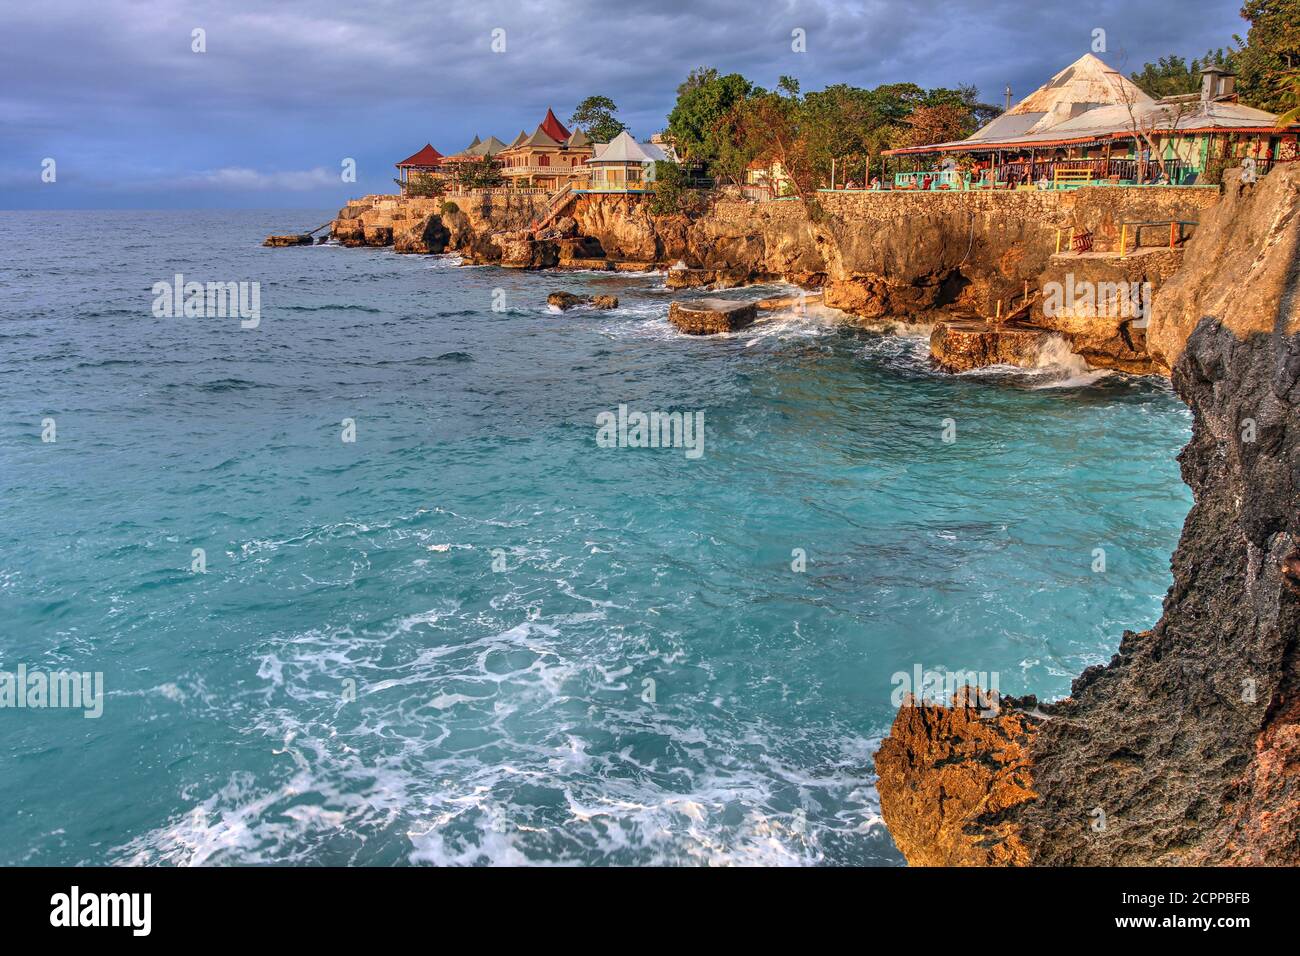 Sunset at 3 Dives point in Negril, Jamaica. The rocky outcrops are very popular for cliff jumping. Stock Photo